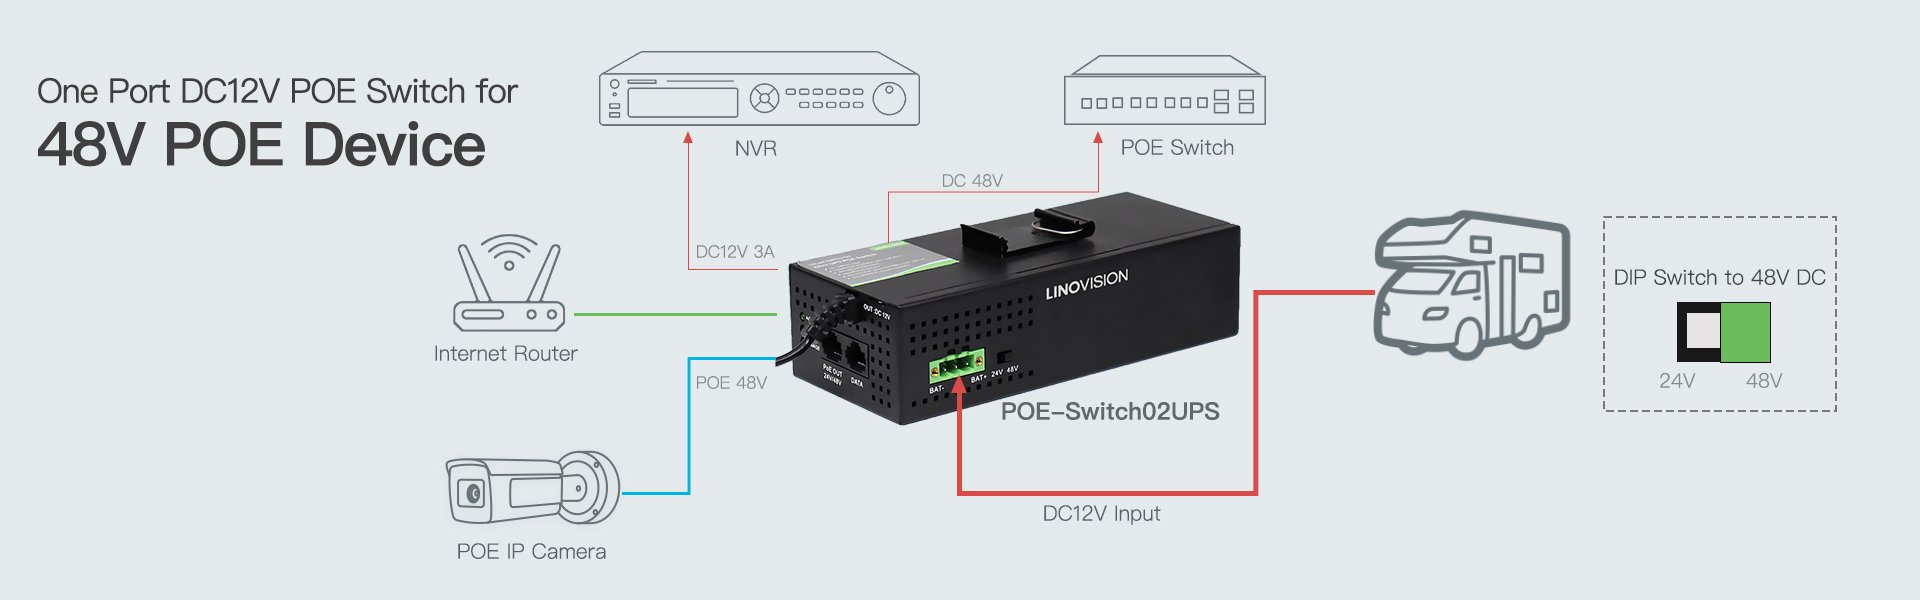 Mua LINOVISION Industrial 5 Ports Gigabit Solar POE Switch with DC12V-48V  to DC48V Voltage Booster,4 x IEEE802.3af/at 30W POE Ports @120W, IP40,  Compact POE Power for Solar Power/RV Truck/VoIP Systems trên